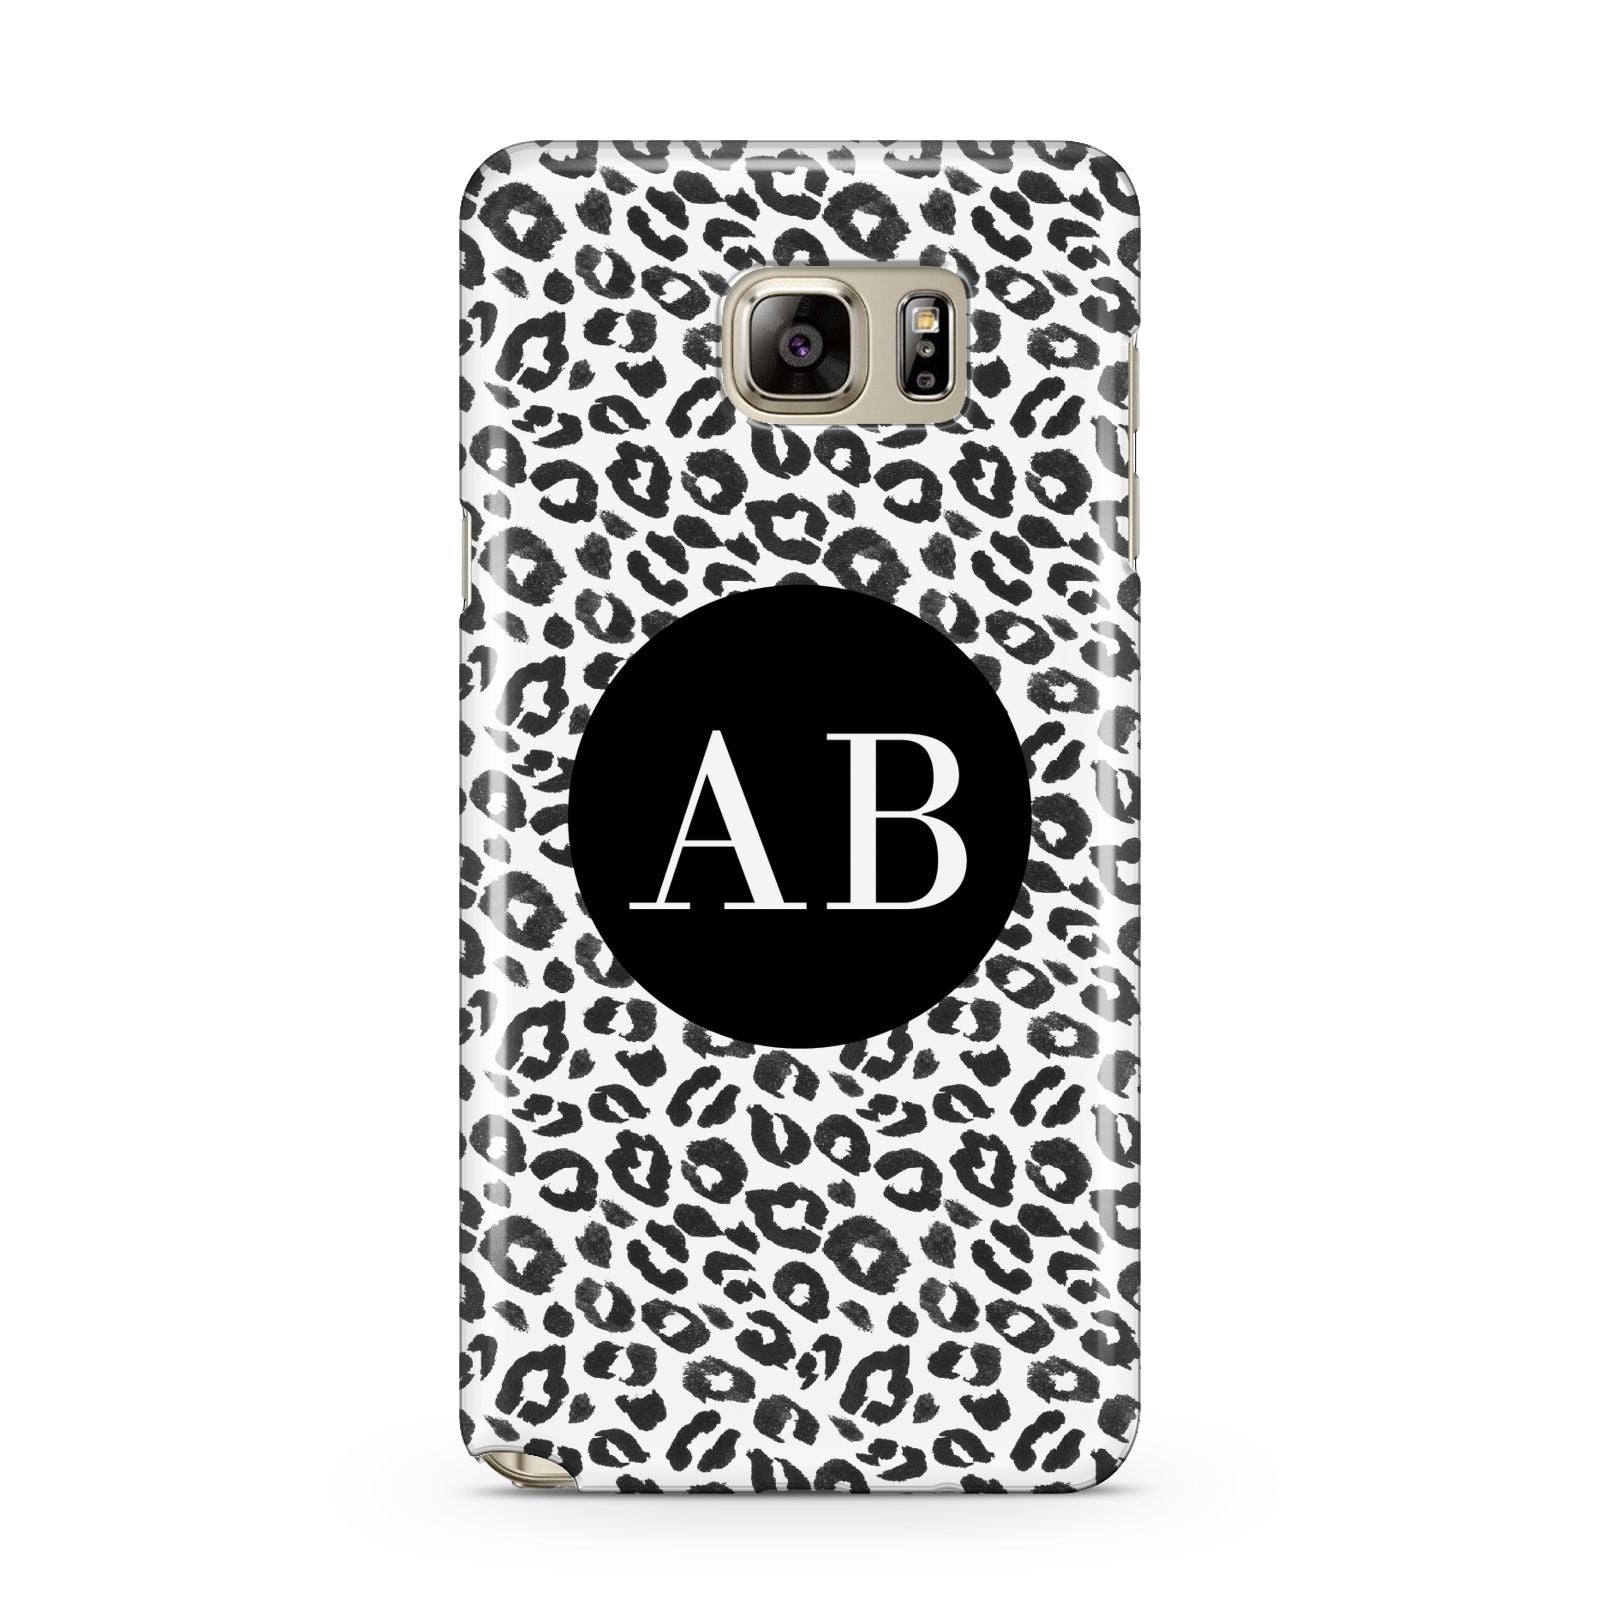 Leopard Print Black and White Samsung Galaxy Note 5 Case